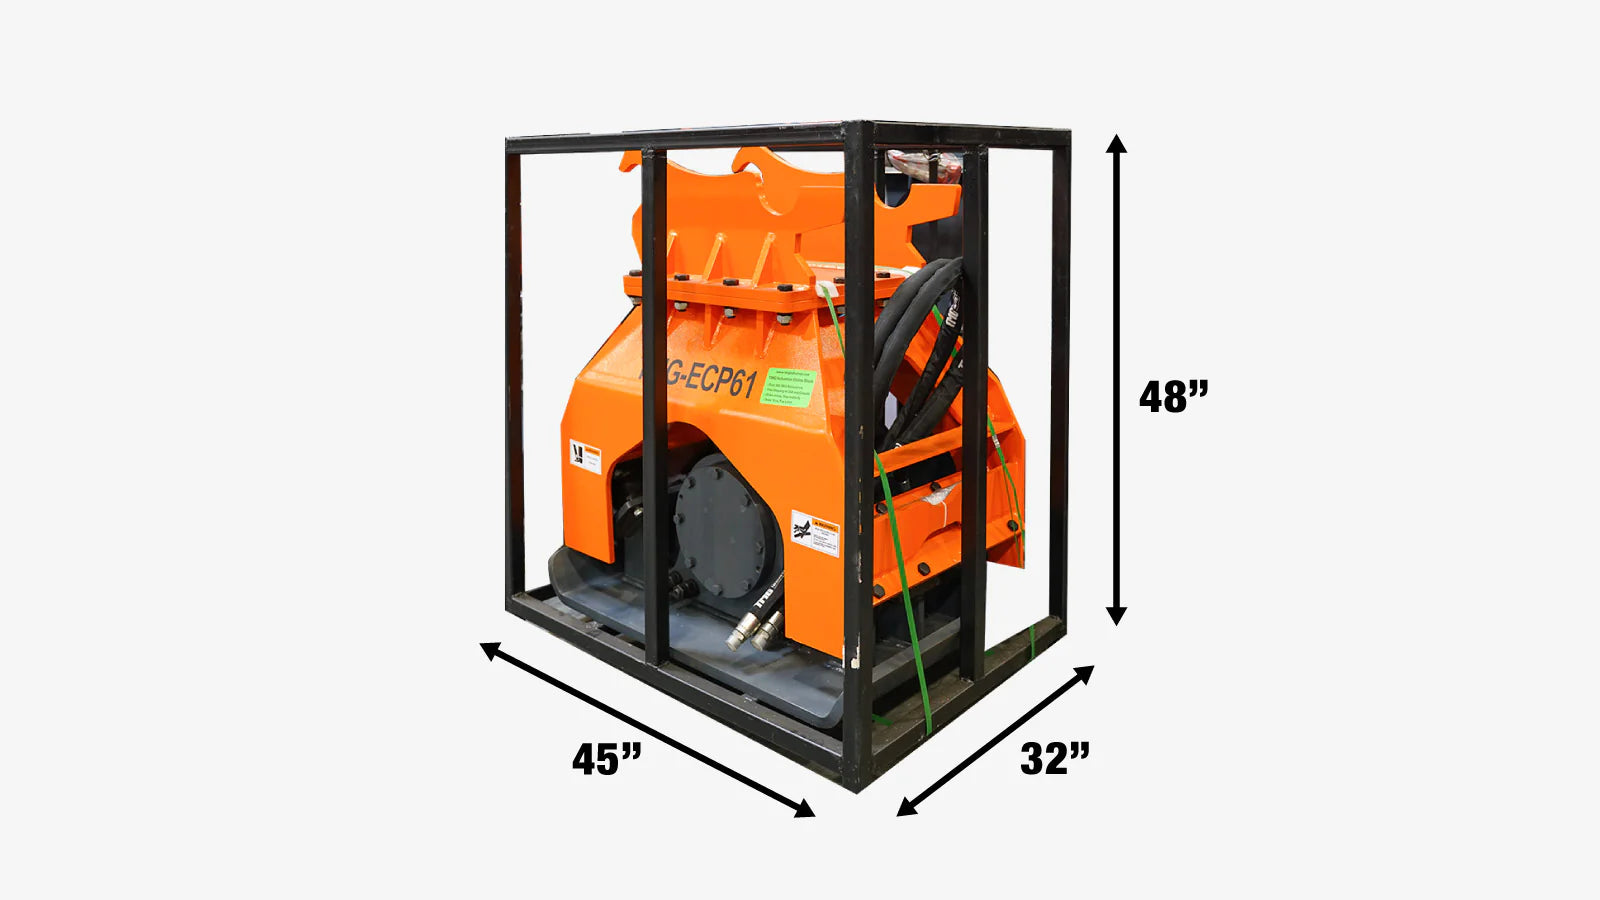 TMG Industrial 22,000-lb Hydraulic Plate Compactor, 10-16 Ton Excavator Weight, 48” Compact Capacity, TMG-ECP61-shipping-info-image